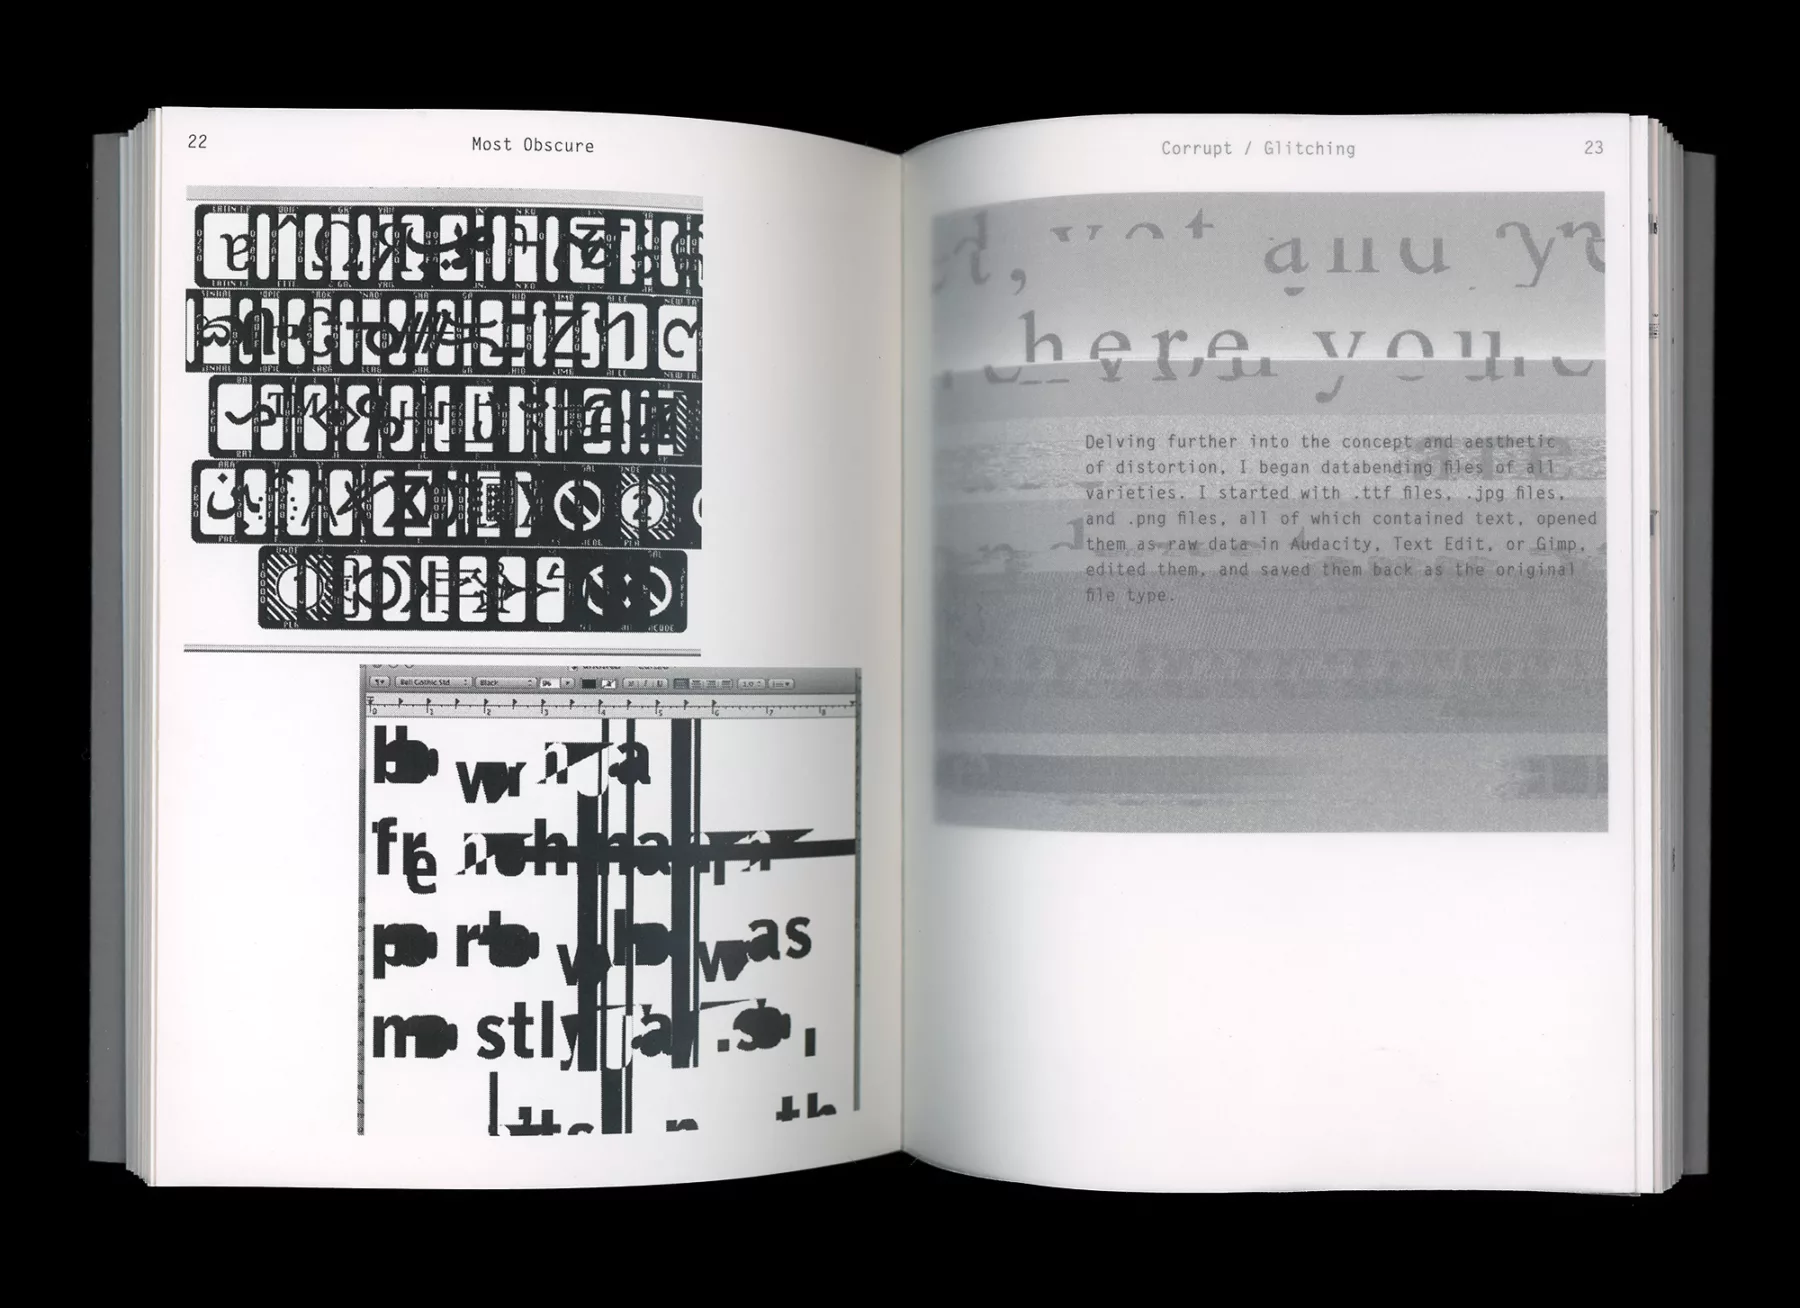 Spread of 'Most Obscure' book showing glitched typefaces.